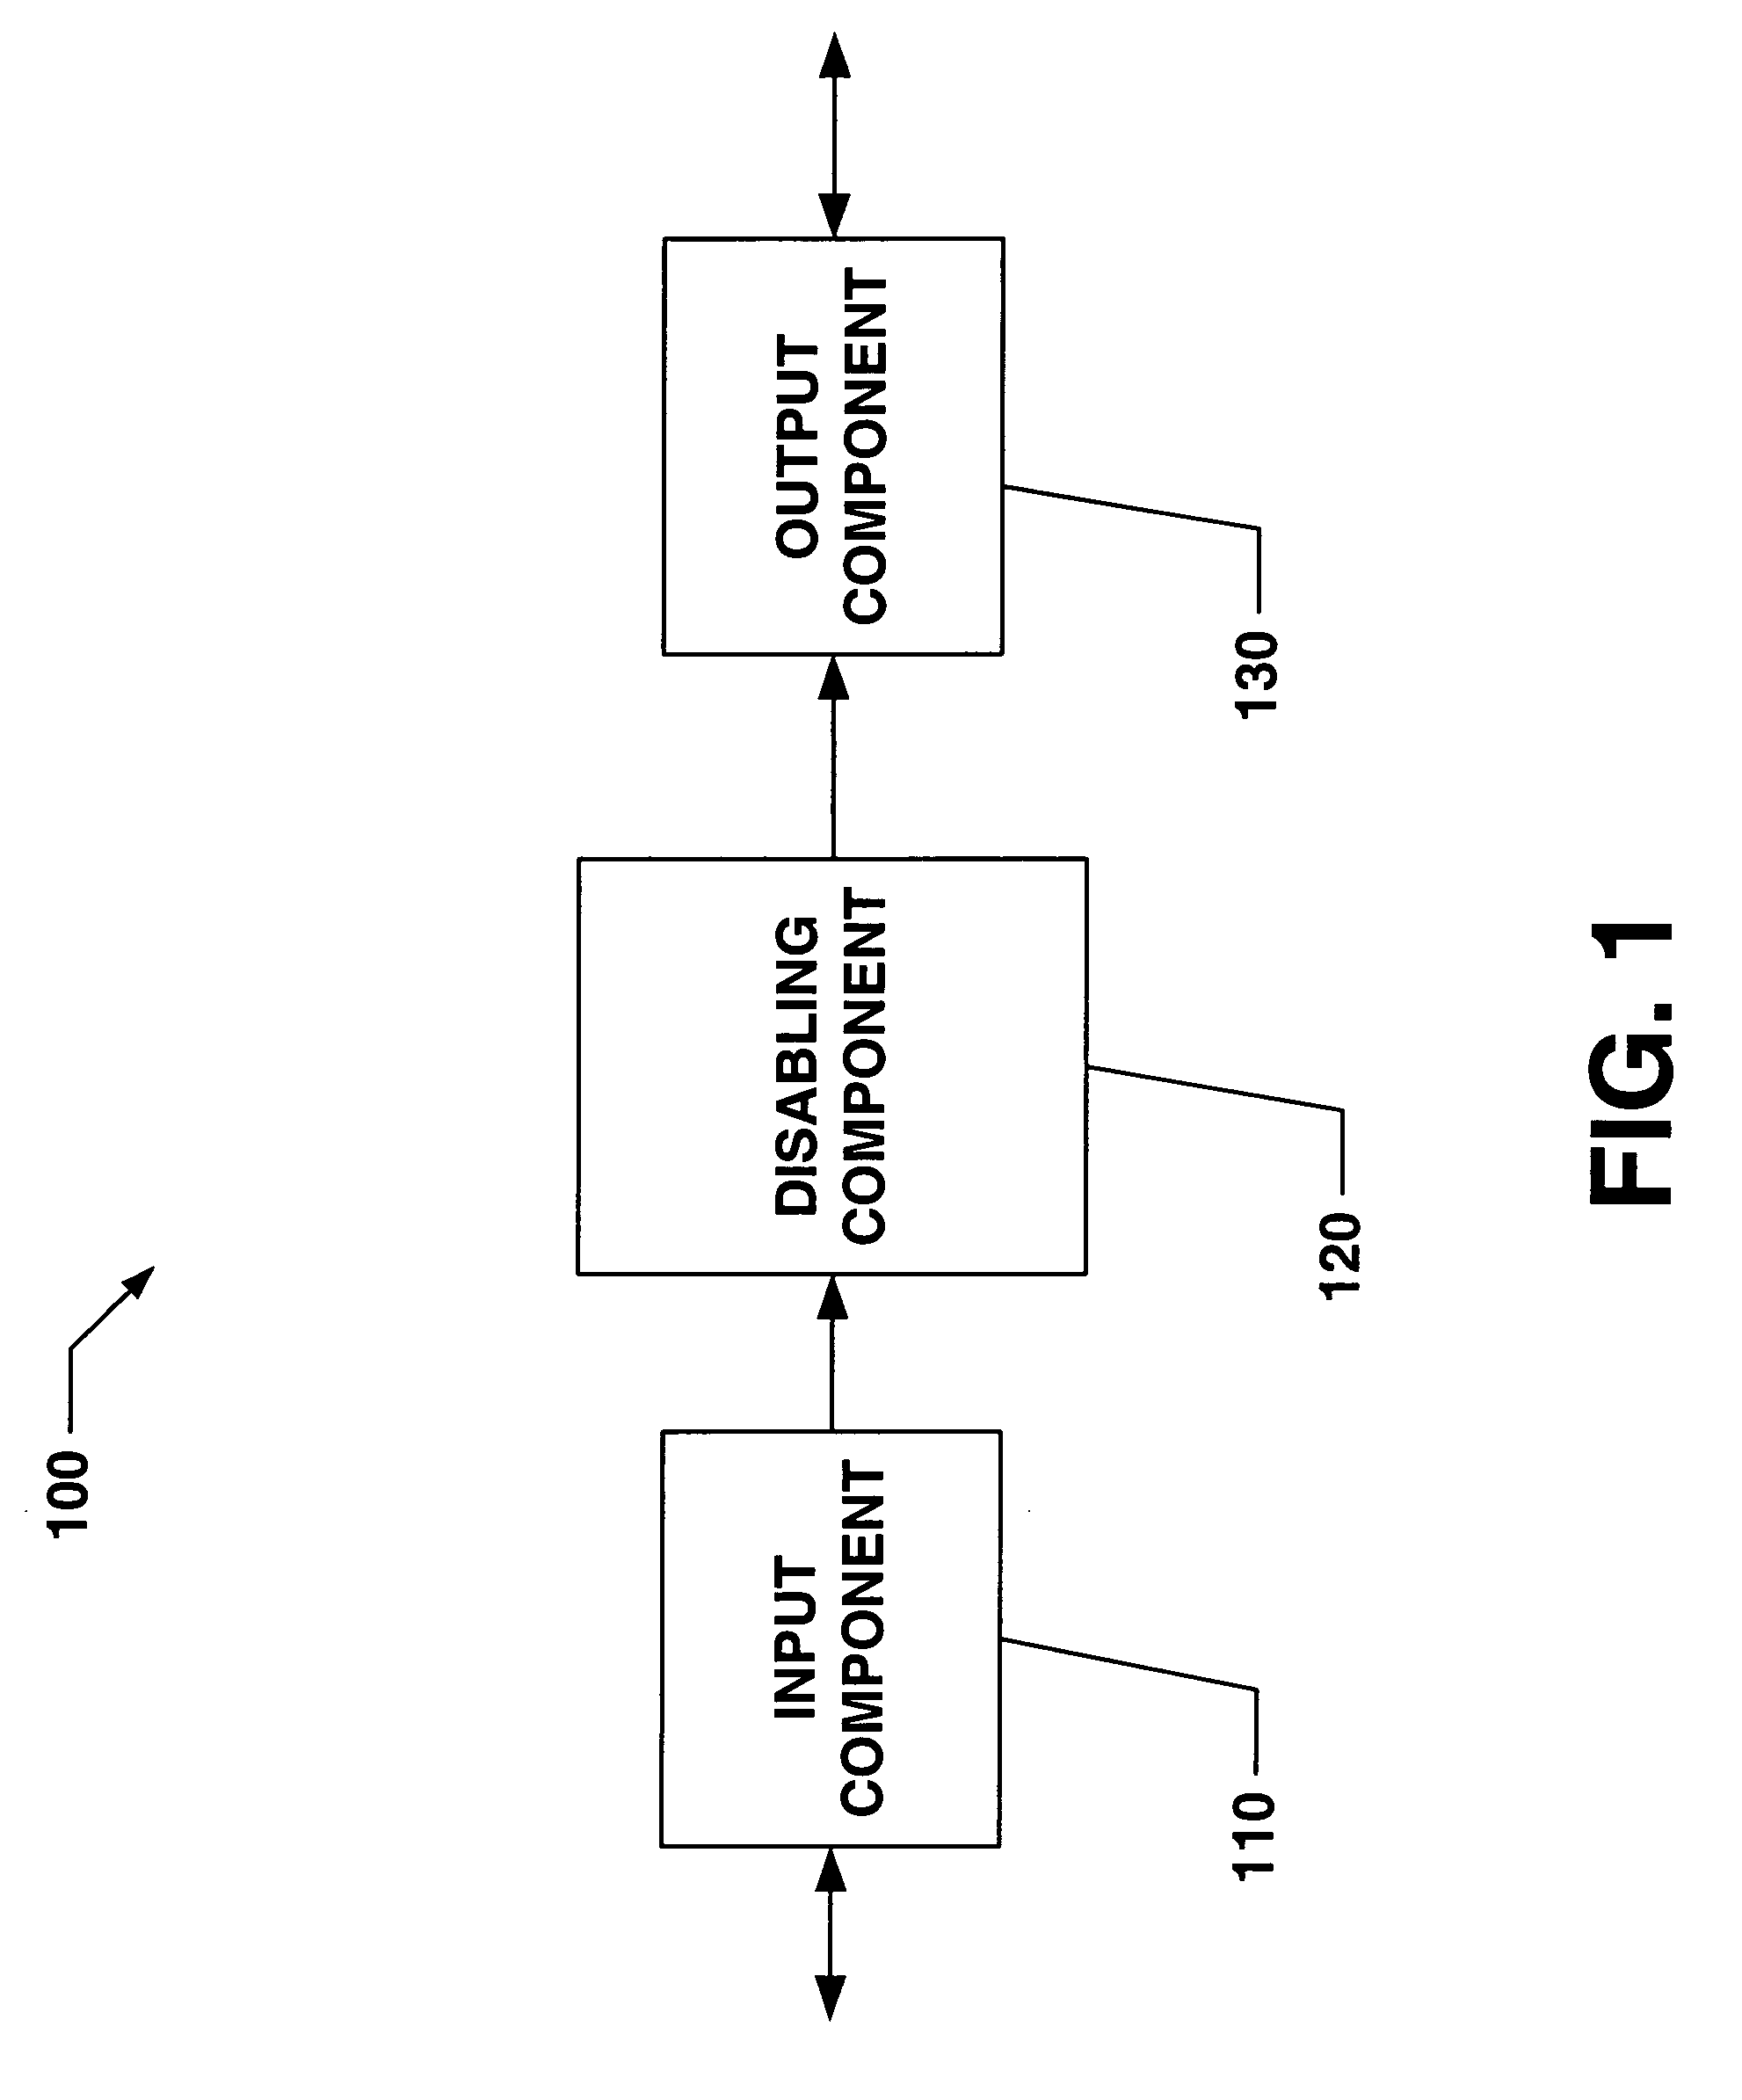 Systems and methods that provide user and/or network personal data disabling commands for mobile devices